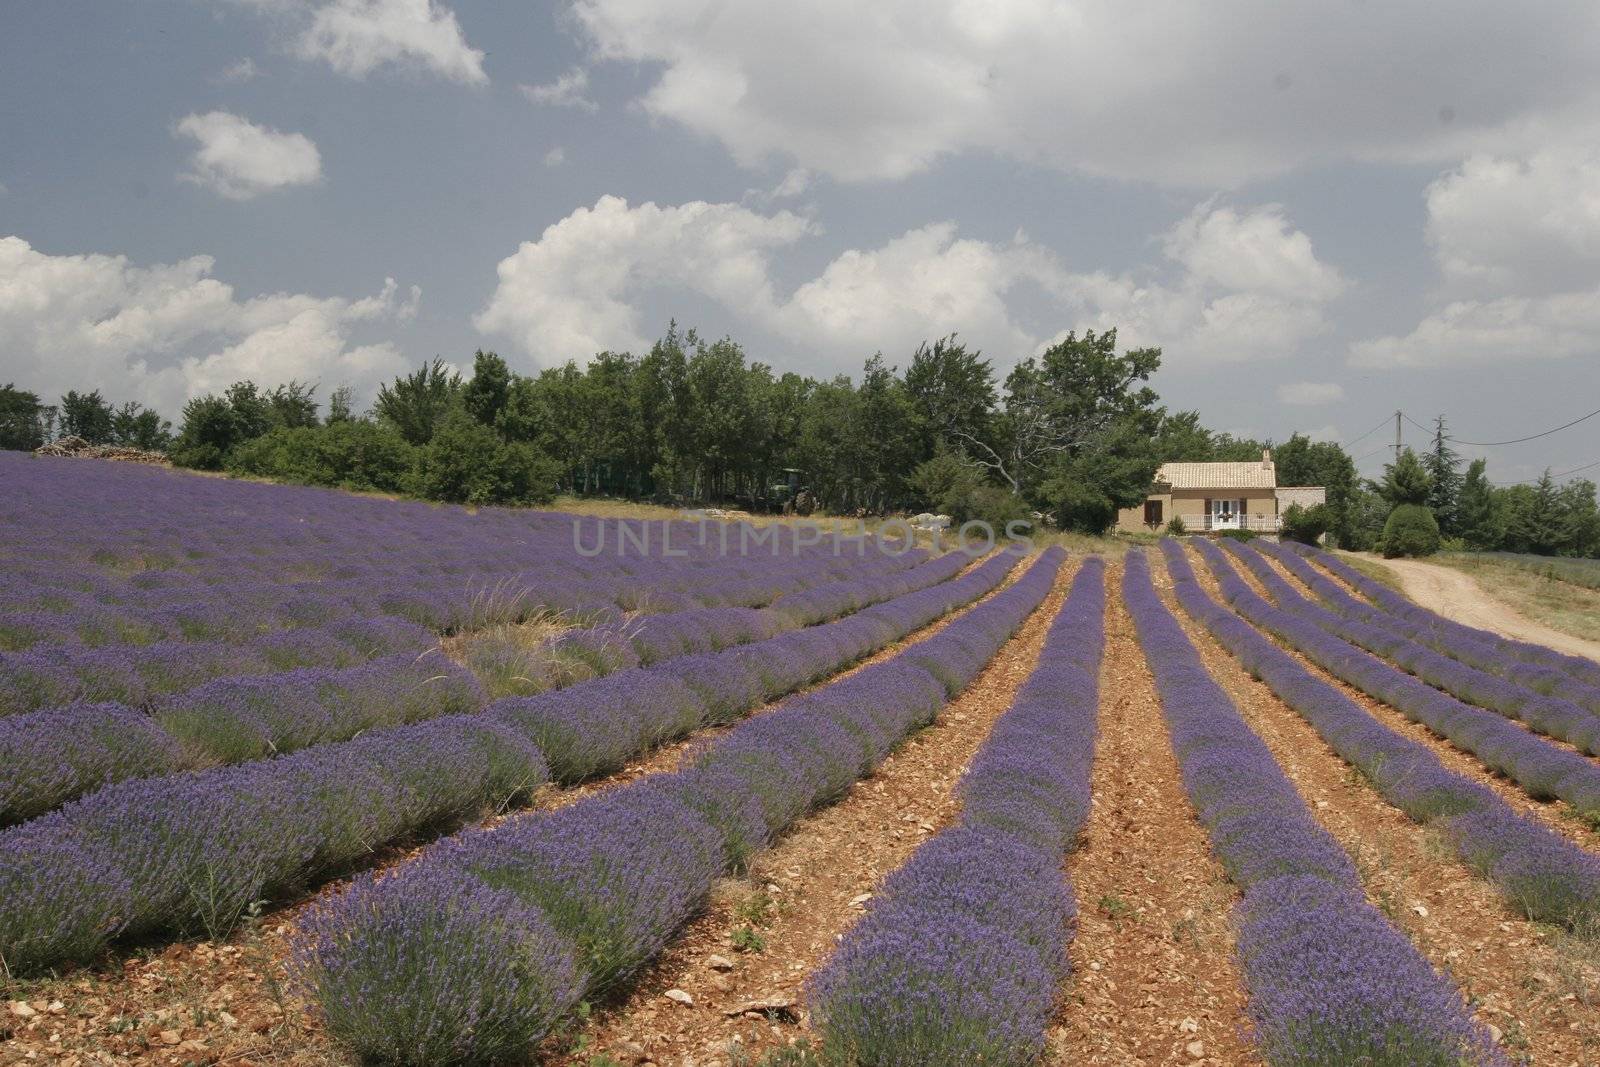 Lavender fields near Sault, Provence, Southern France. by Natureandmore